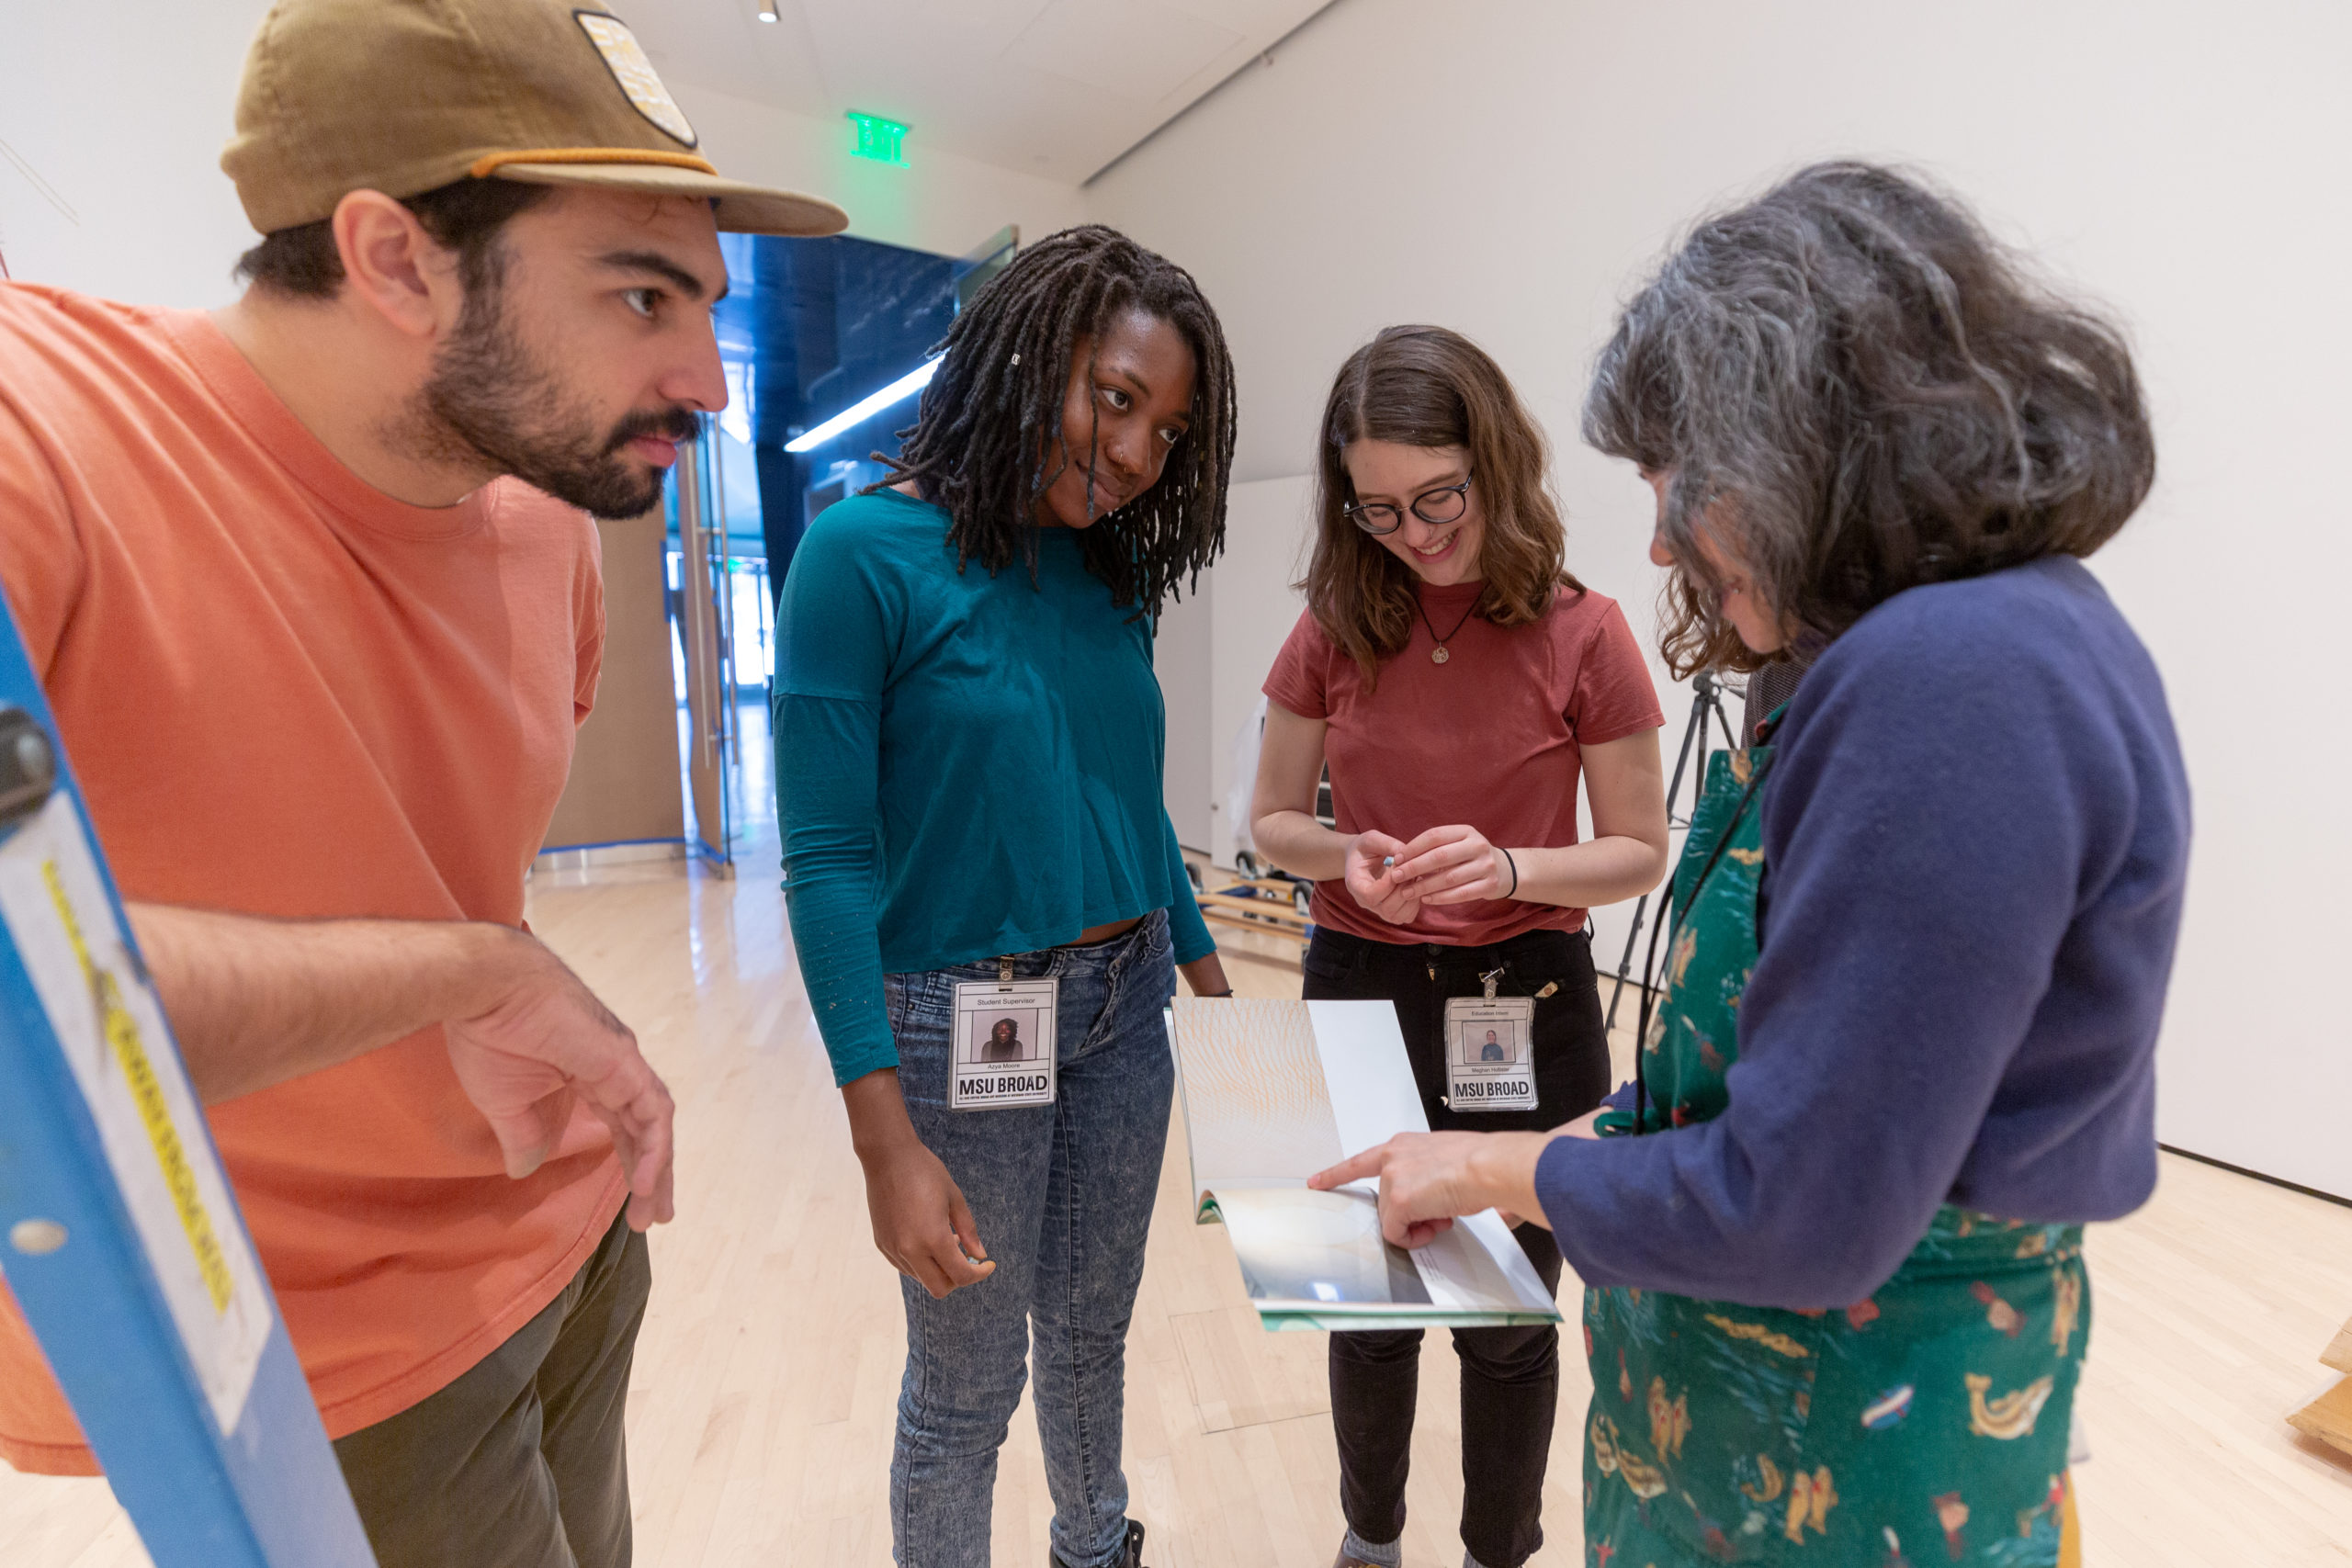 Faculty and students in discussion at the Broad Museum